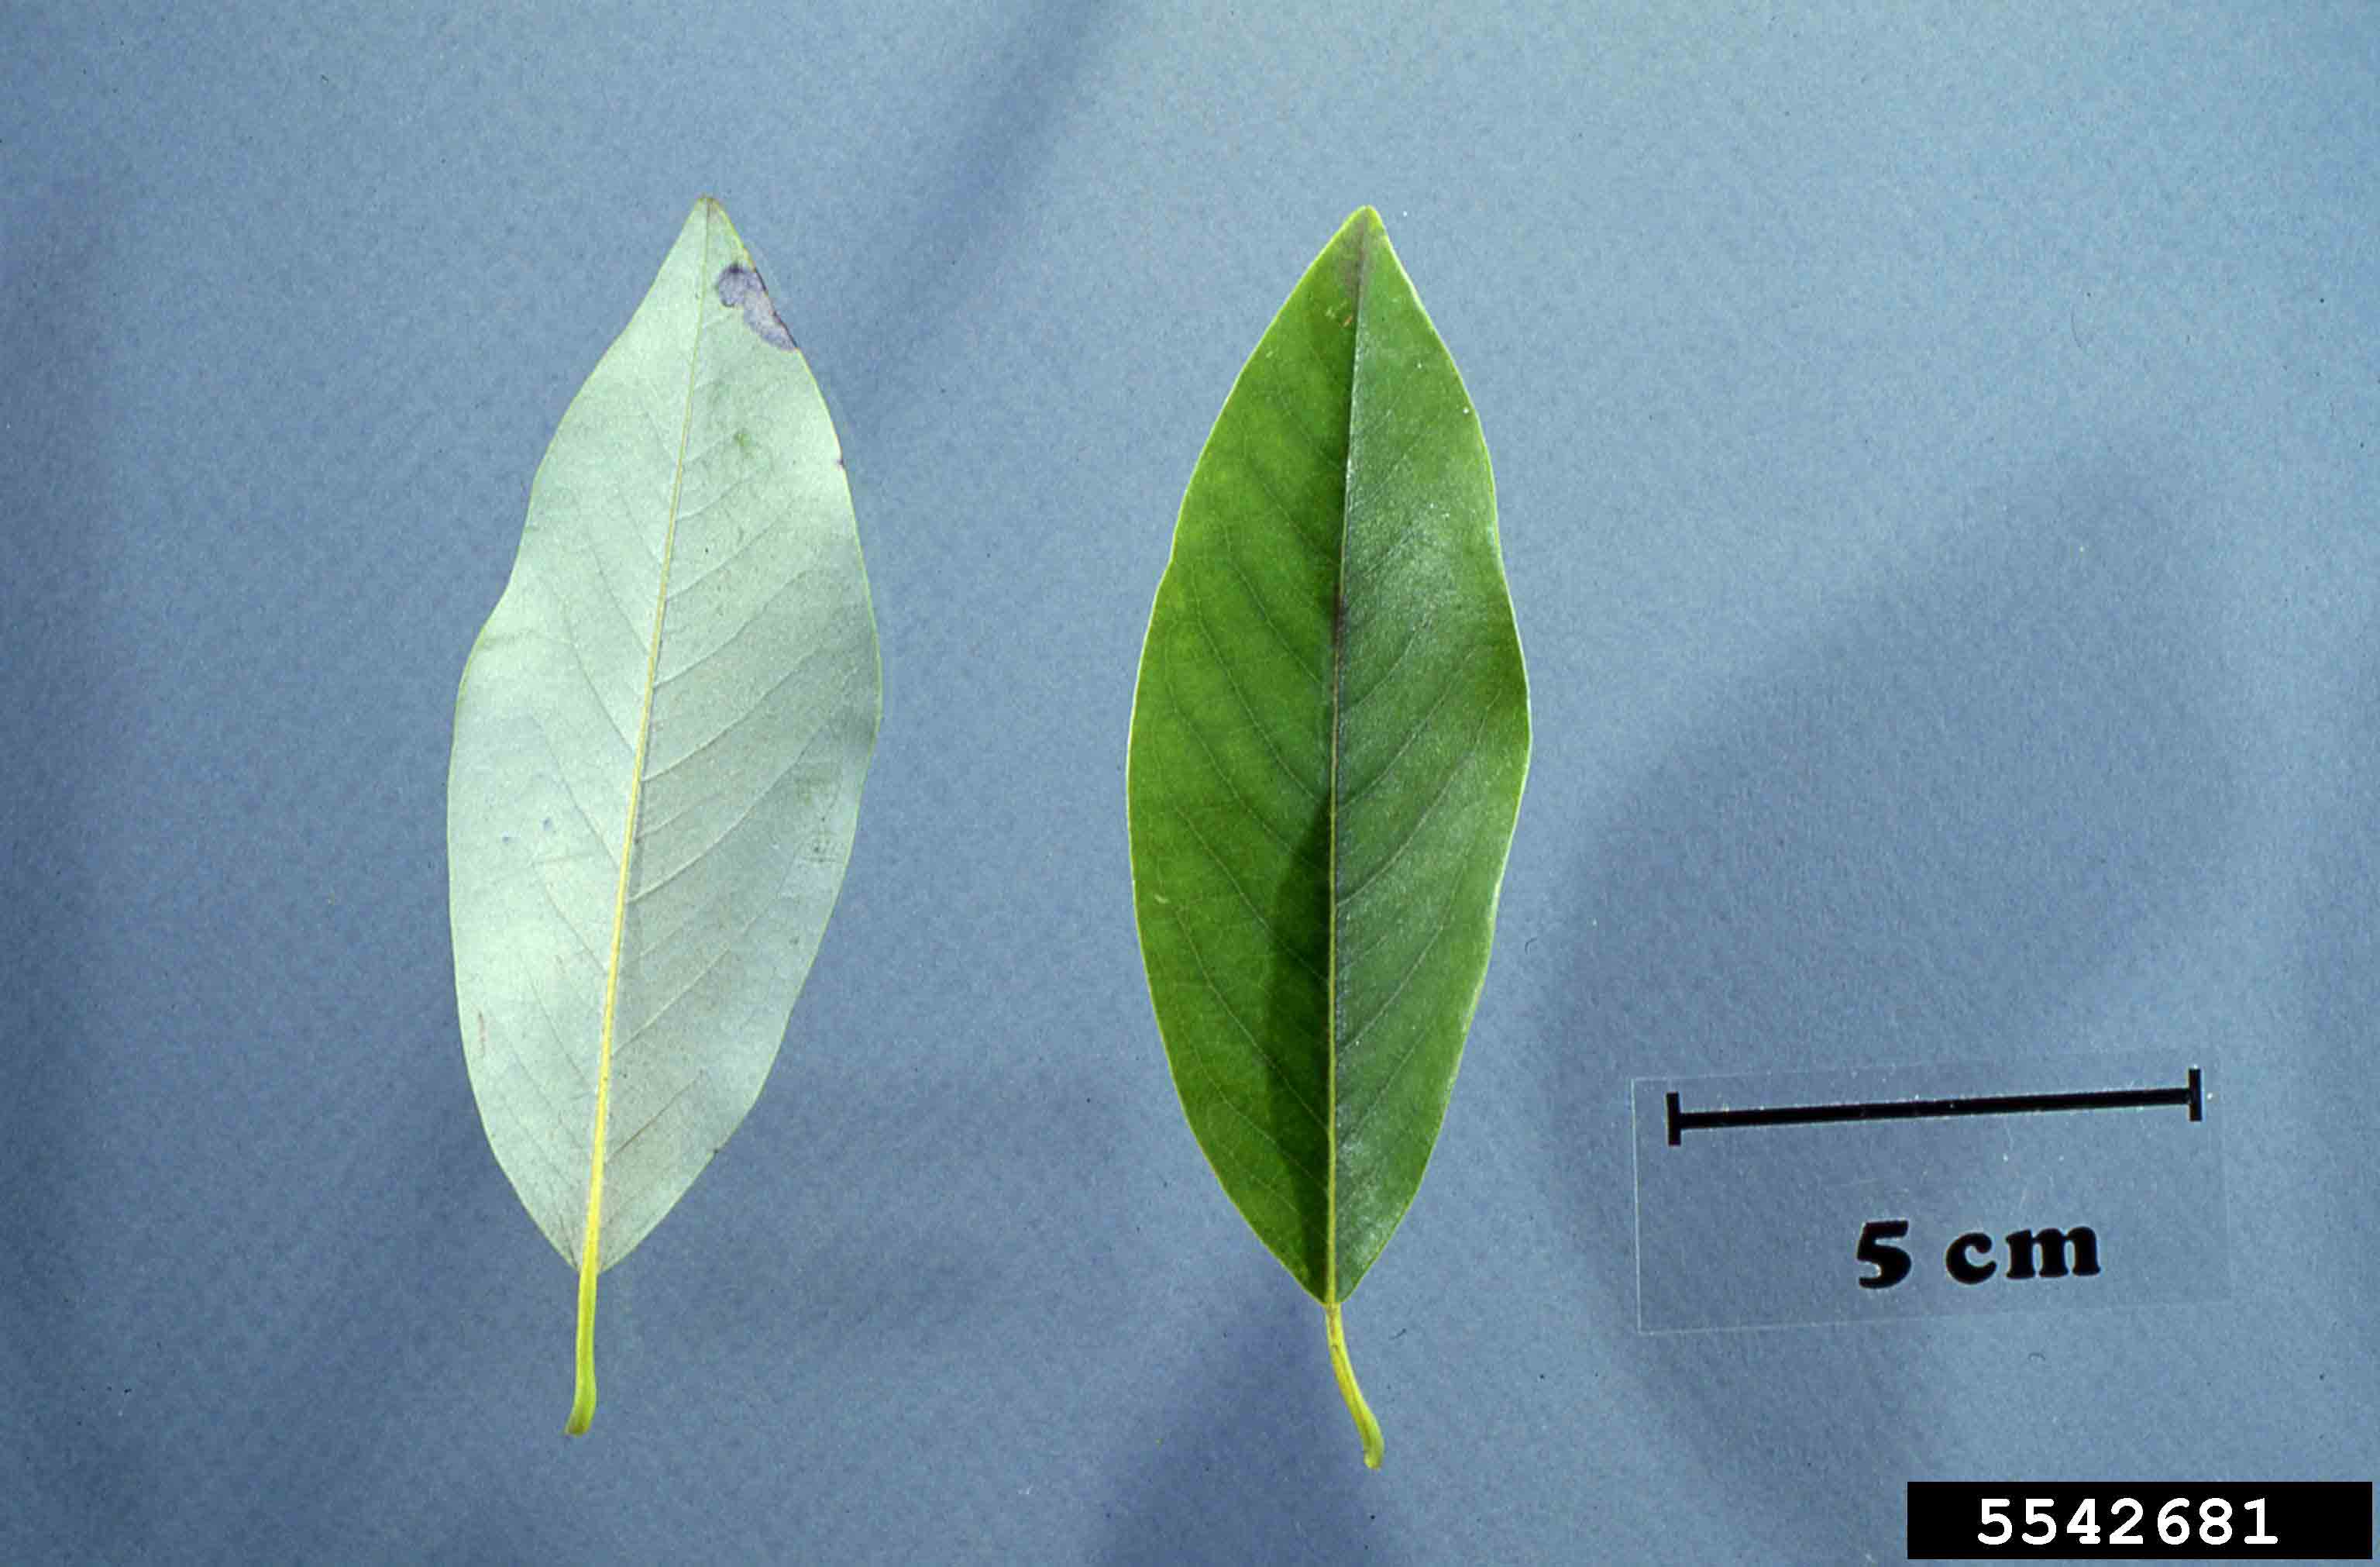 Sweetbay magnolia leaves, with whitish underside and lustrous green upper side